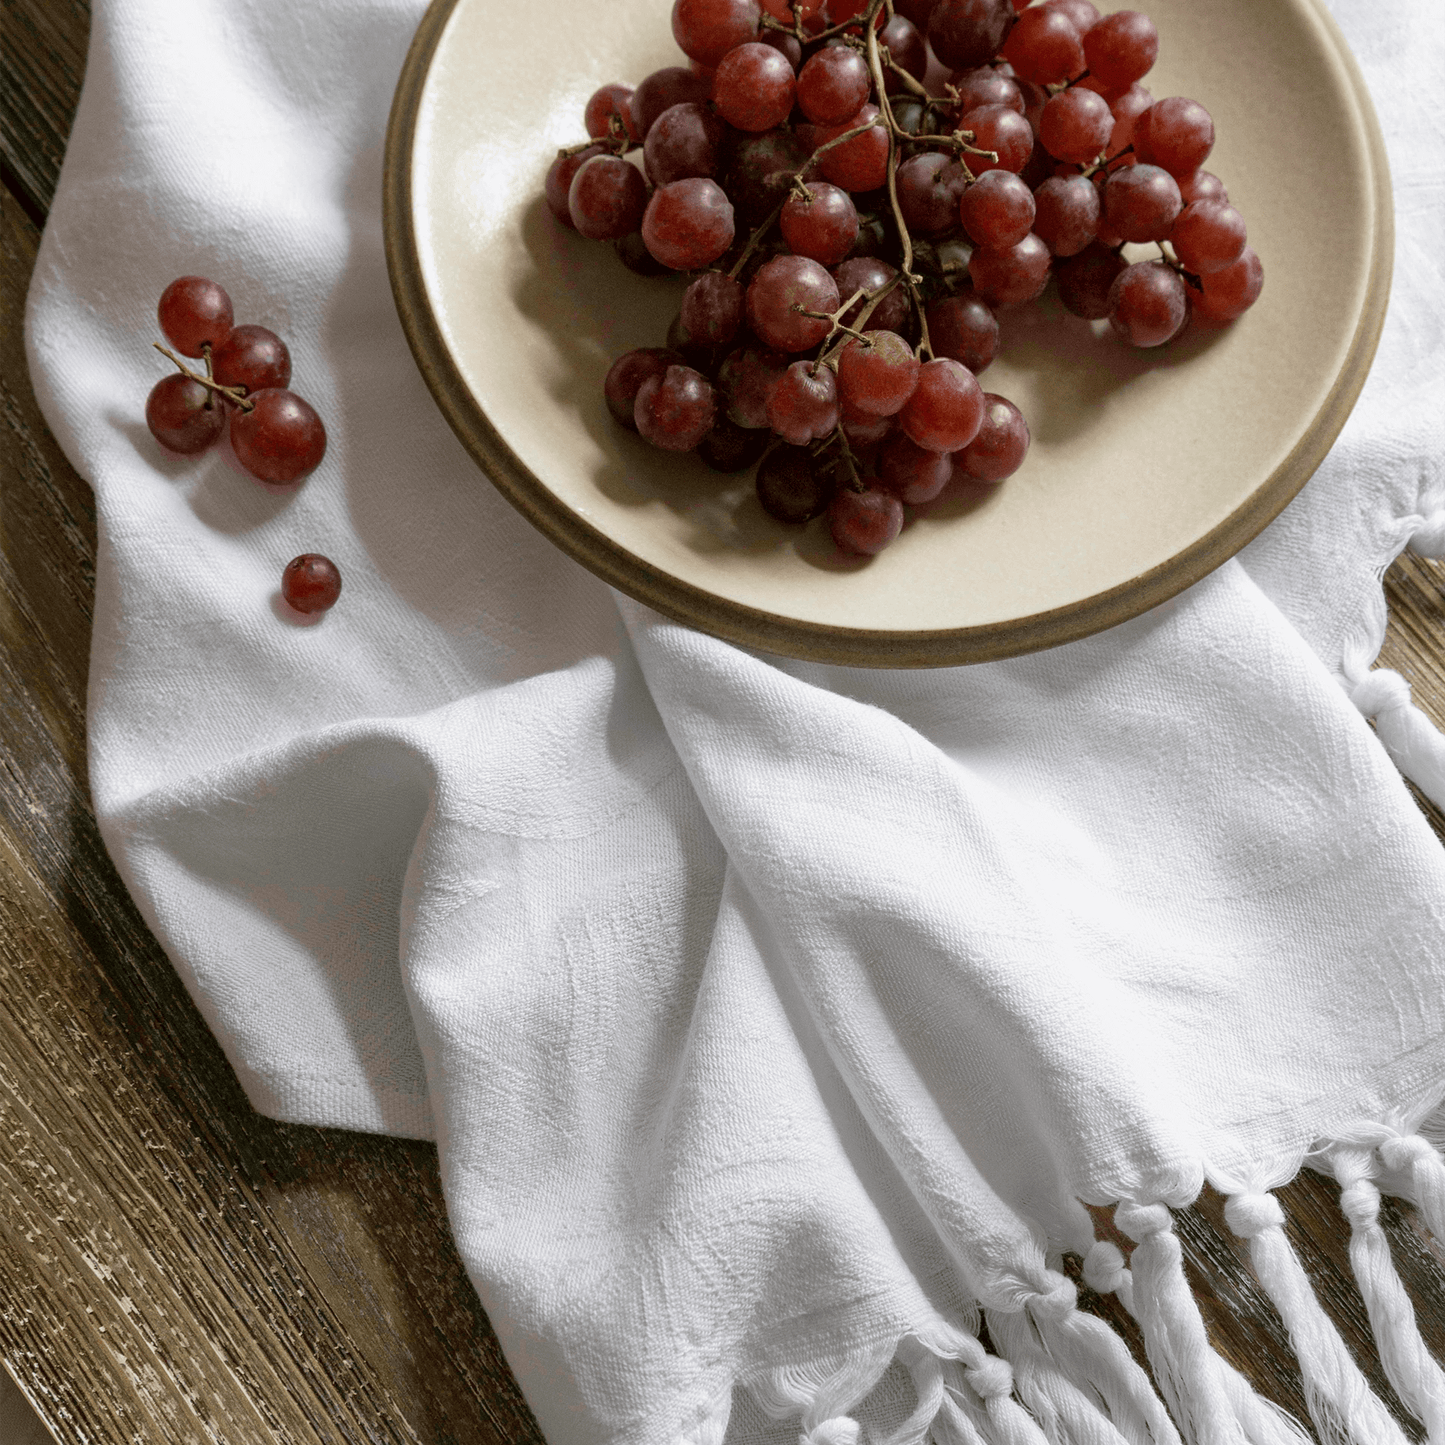 White Turkish towel as a hand towel with grapes